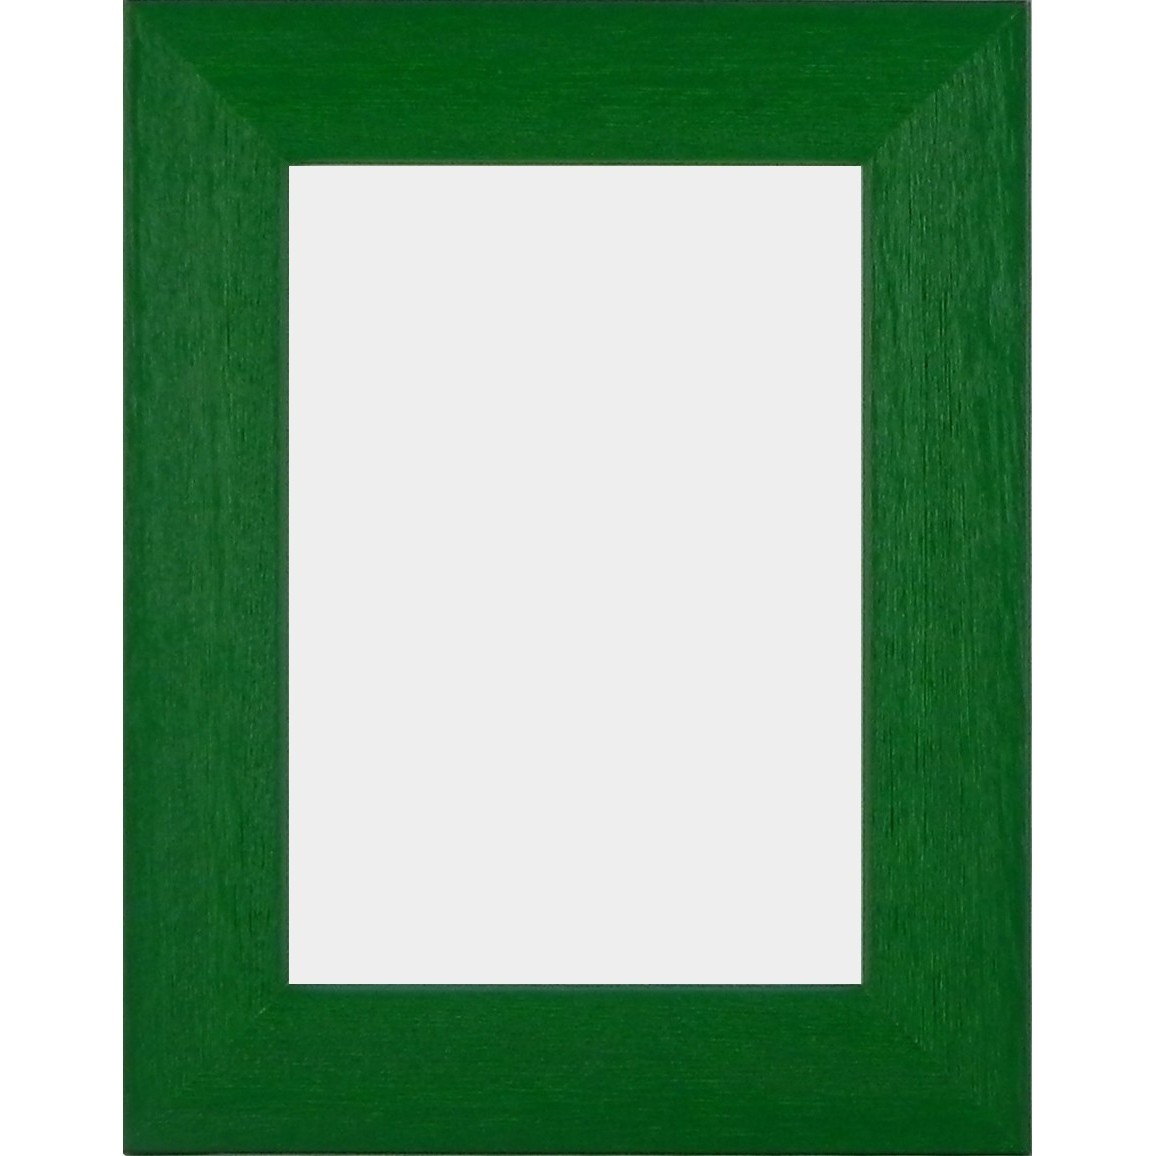 Solid Wood Scratched Grain Picture Frame Green